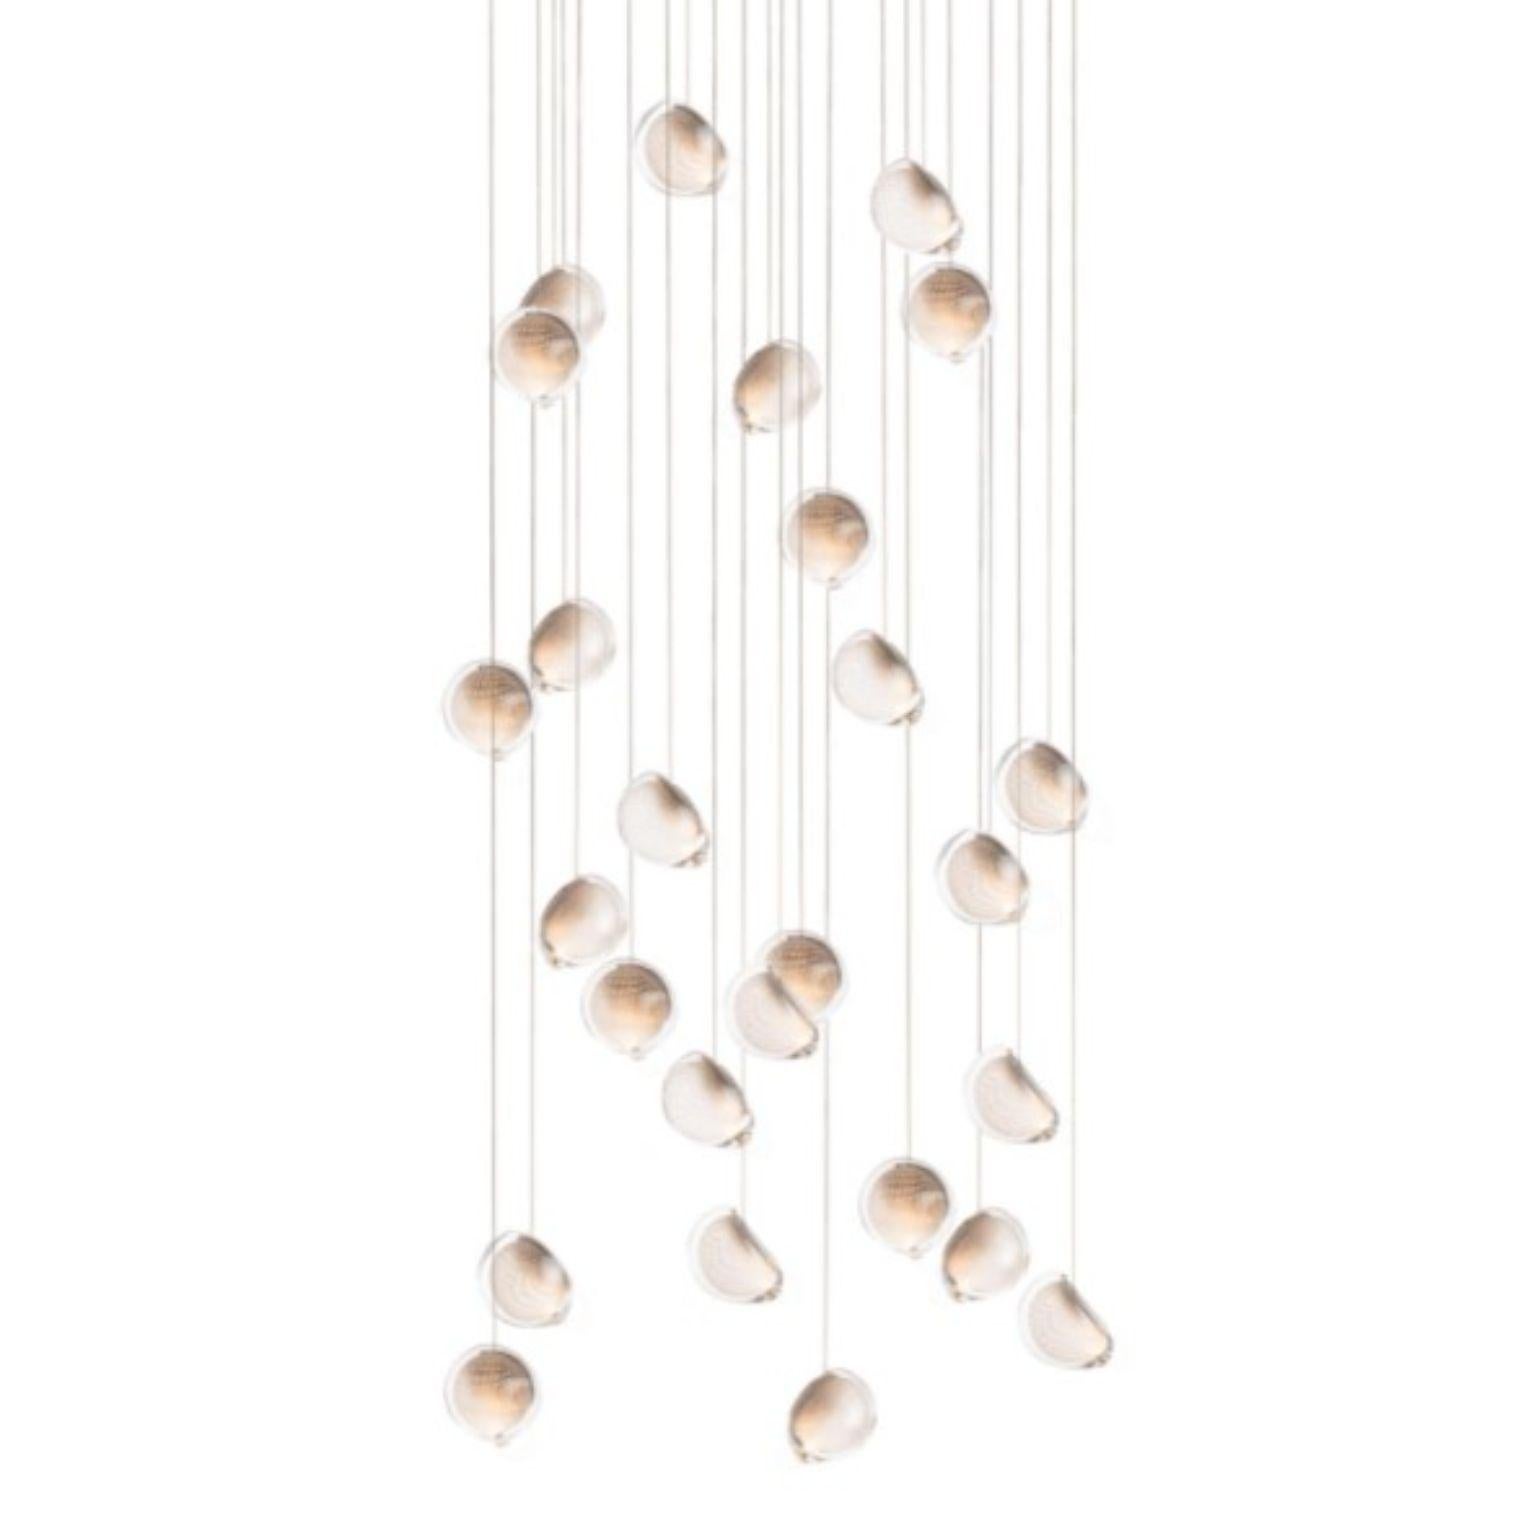 76.26 Pendant by Bocci
Dimensions: D 100 x W 33.5 x H 300 cm
Materials: white powder coated square canopy
Weight: 28.2 kg
Also available in different dimensions.

All our lamps can be wired according to each country. If sold to the USA it will